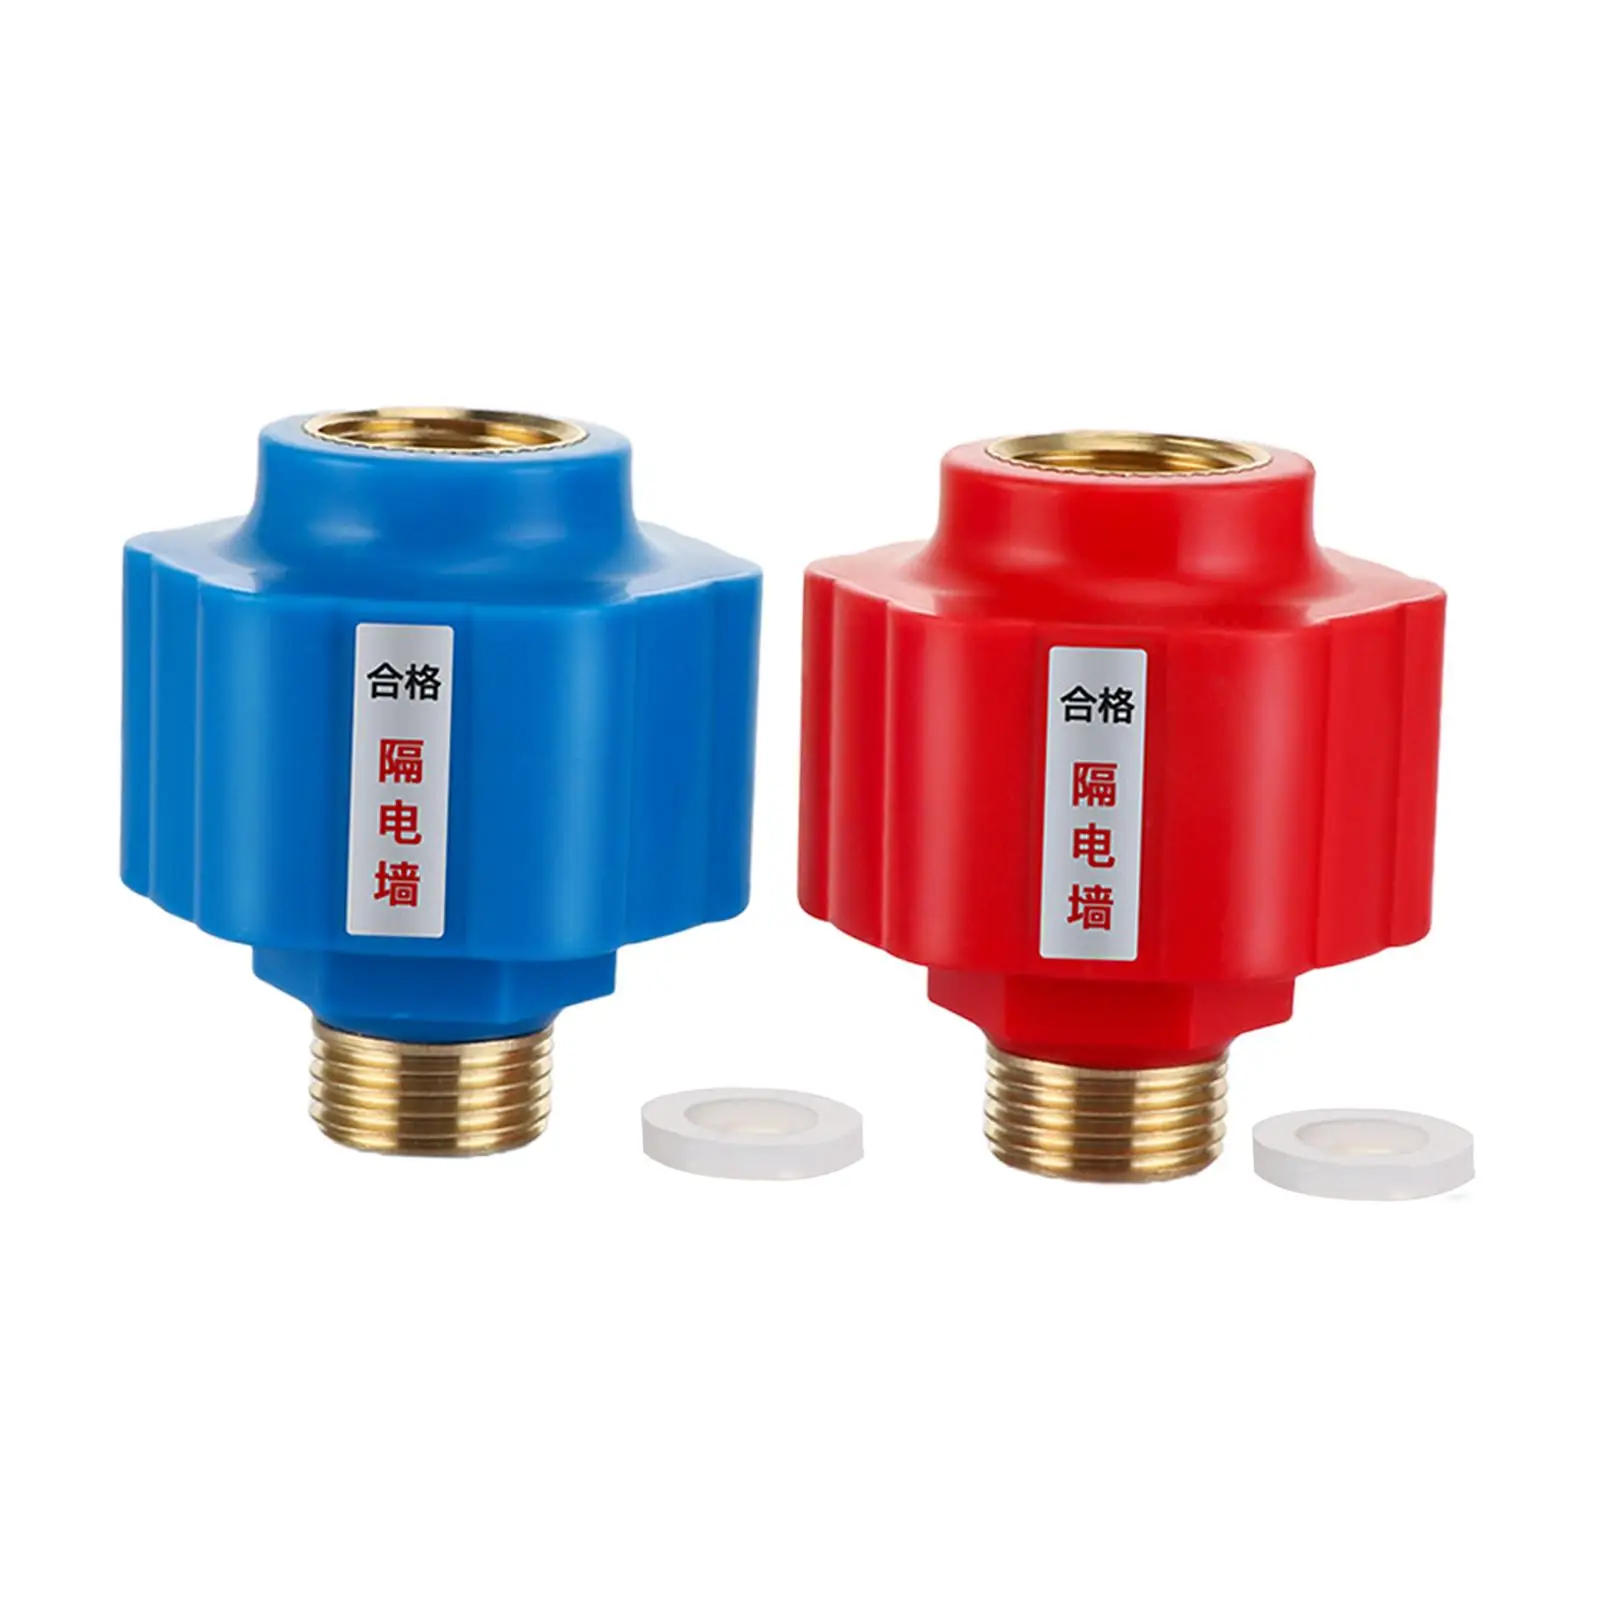 Electric Water Heater Anti Electric Wall Valve Anti-leakage Accessory Brass Professional Safety Protect for Home Kitchen Bath